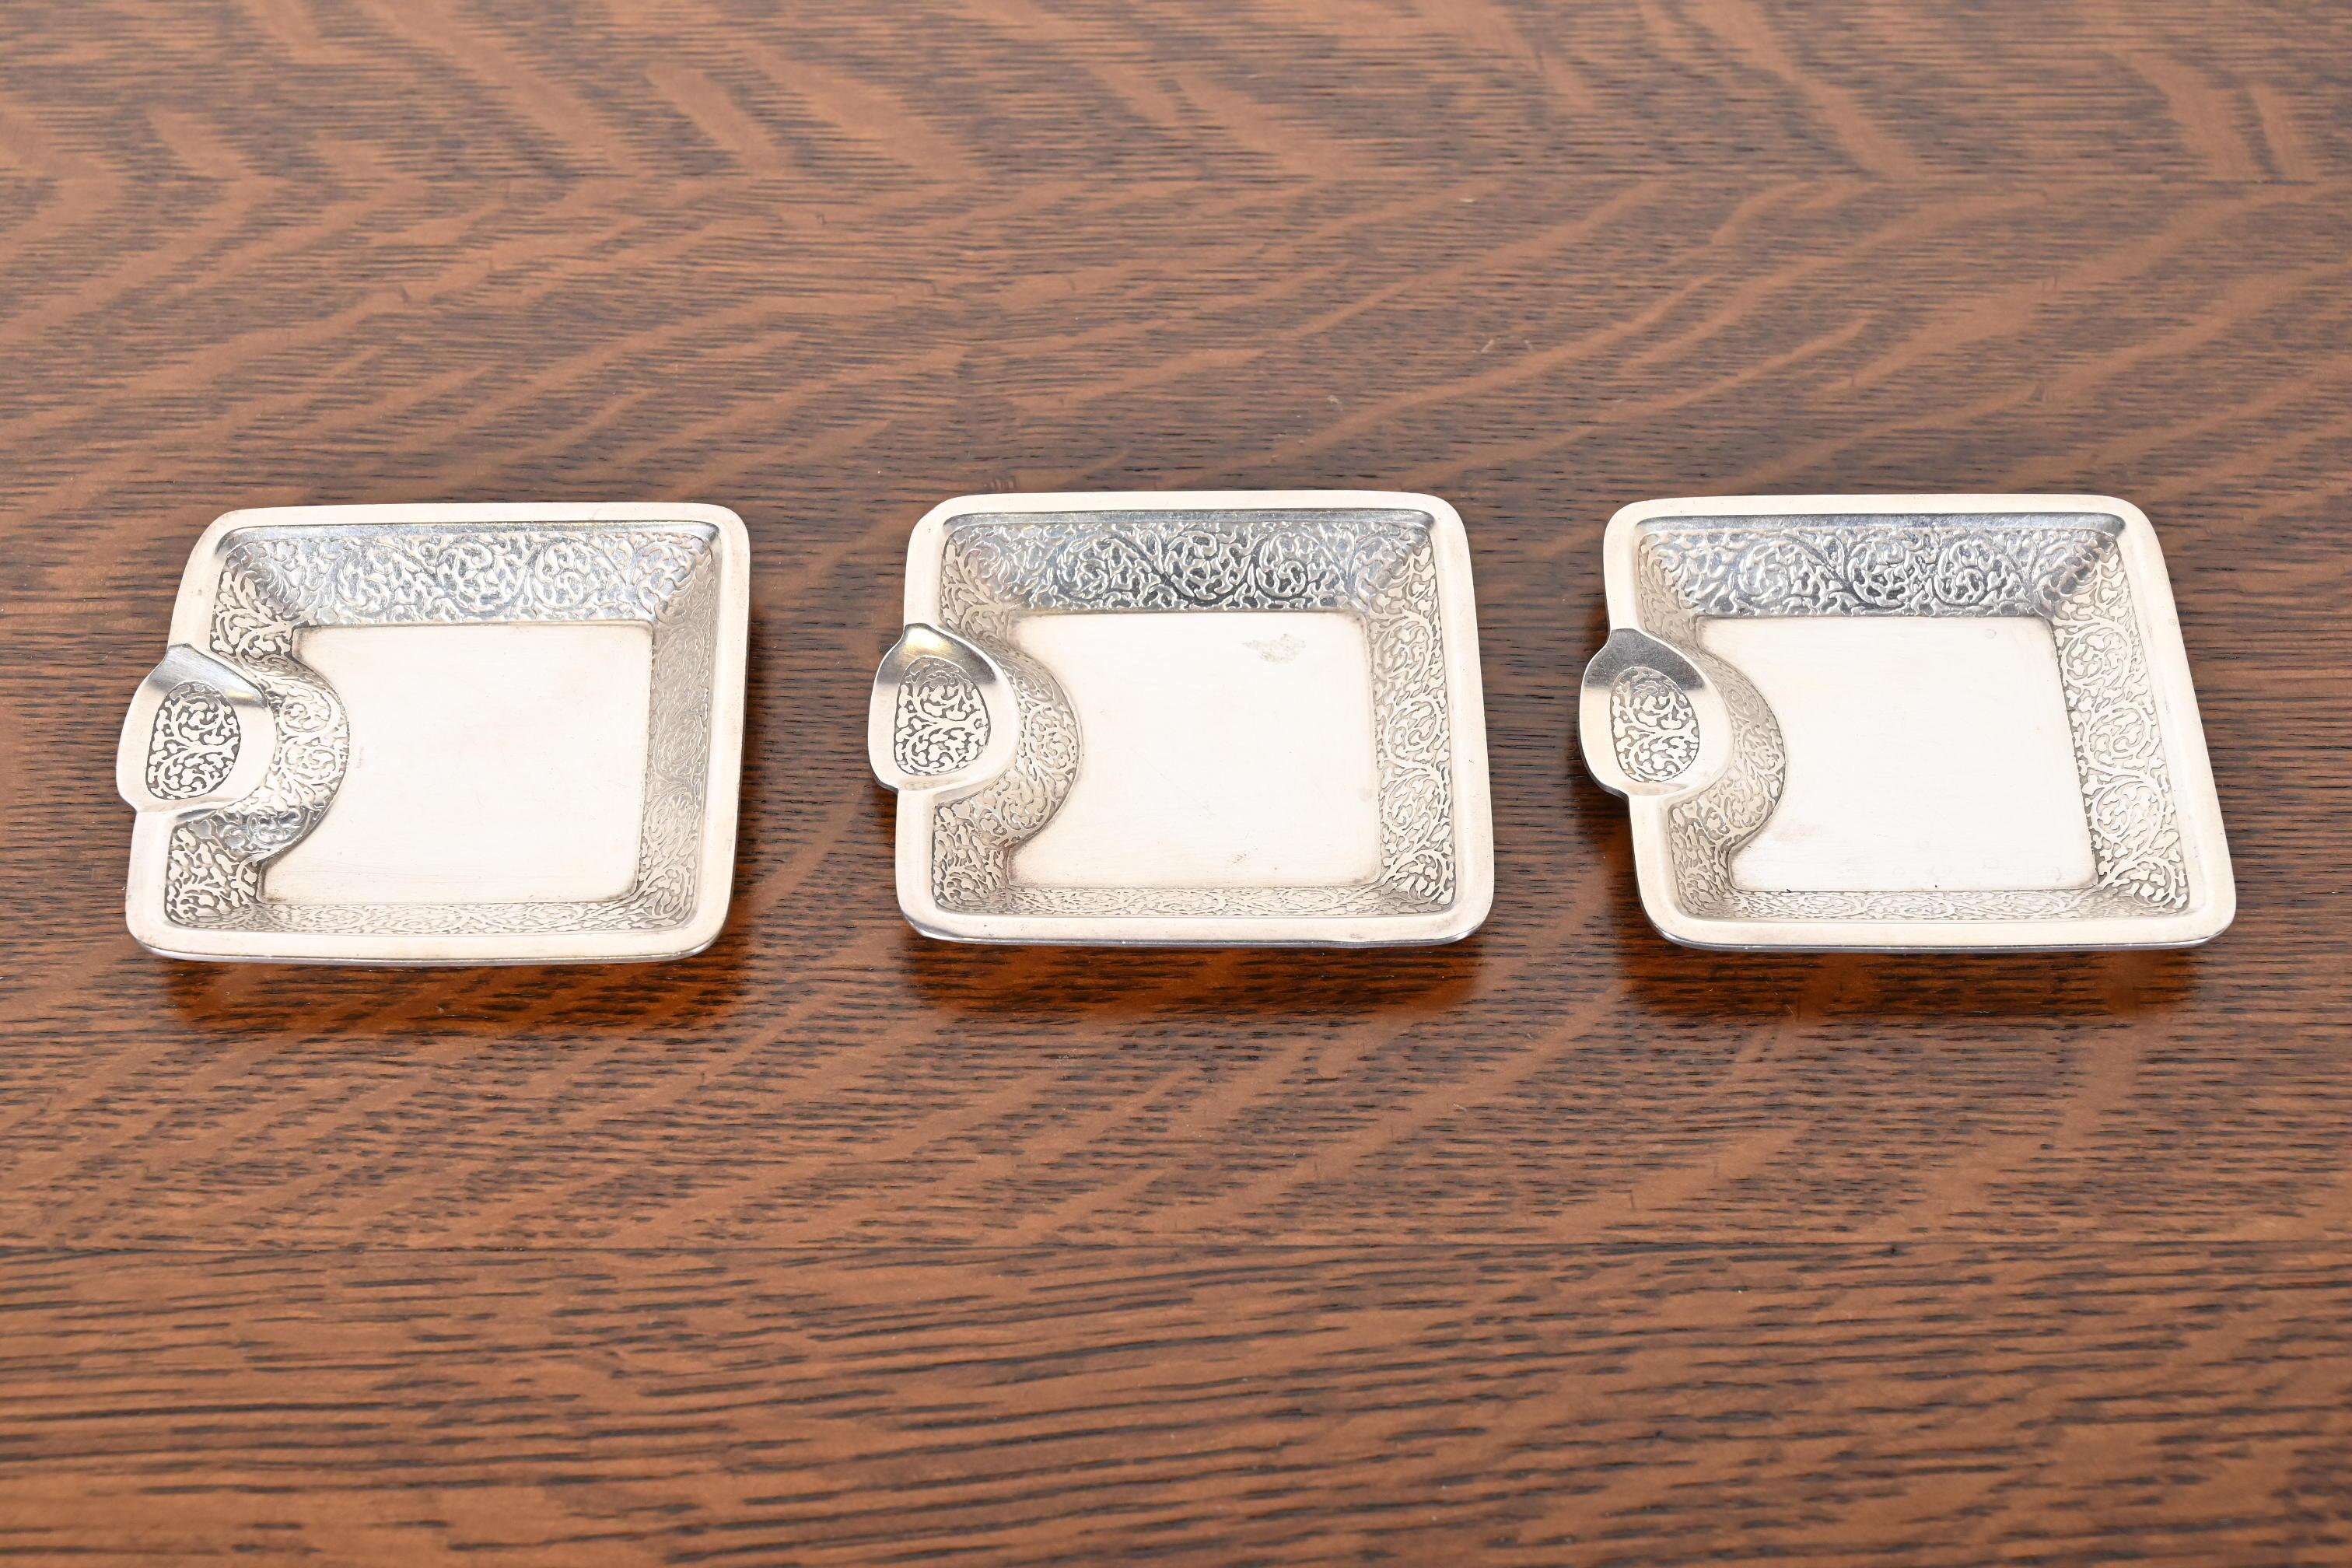 Tiffany & Co. Art Deco Sterling Silver Ashtrays or Catchall Trays, Set of Three 4